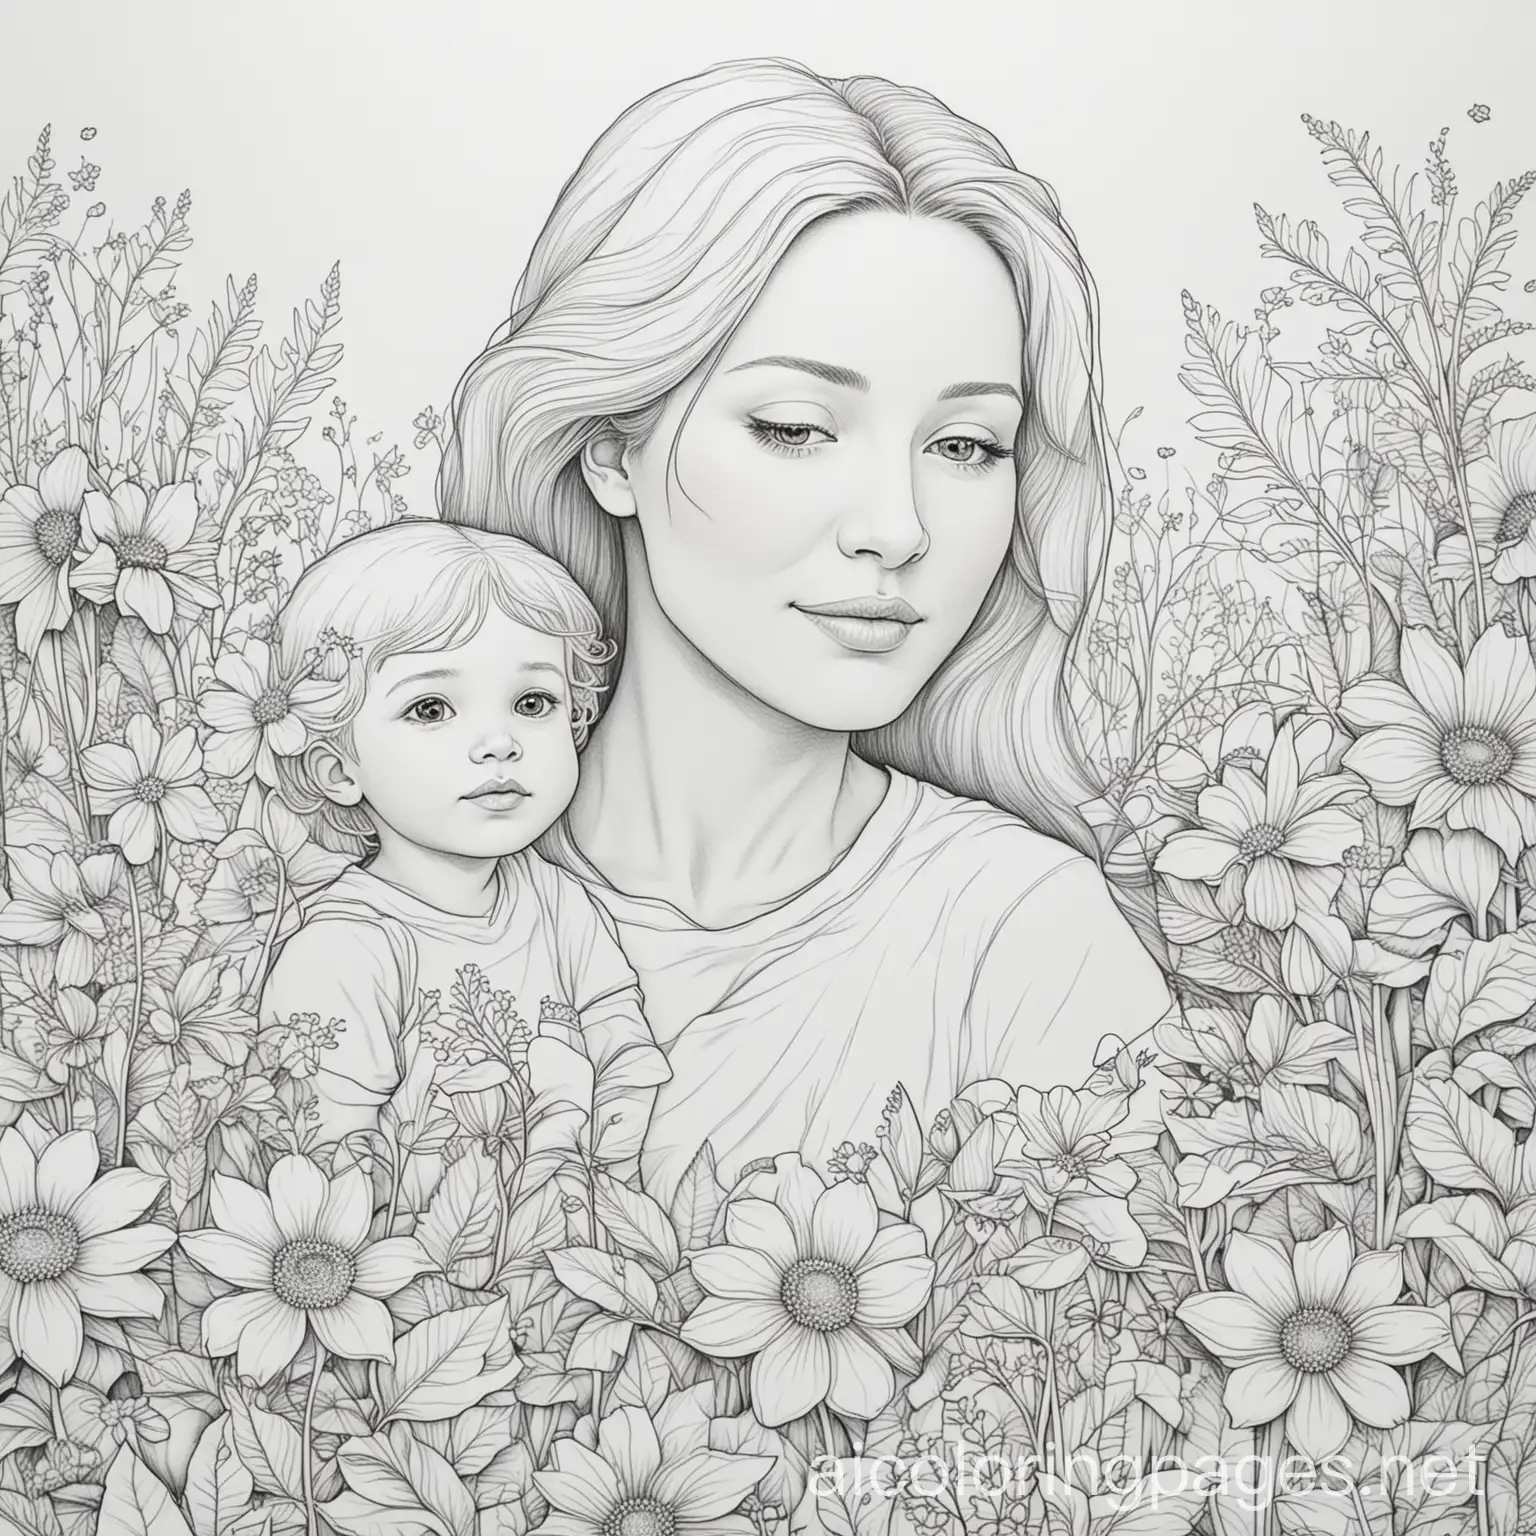 a mother and a child sorounded by flowers
, Coloring Page, black and white, line art, white background, Simplicity, Ample White Space. The background of the coloring page is plain white to make it easy for young children to color within the lines. The outlines of all the subjects are easy to distinguish, making it simple for kids to color without too much difficulty